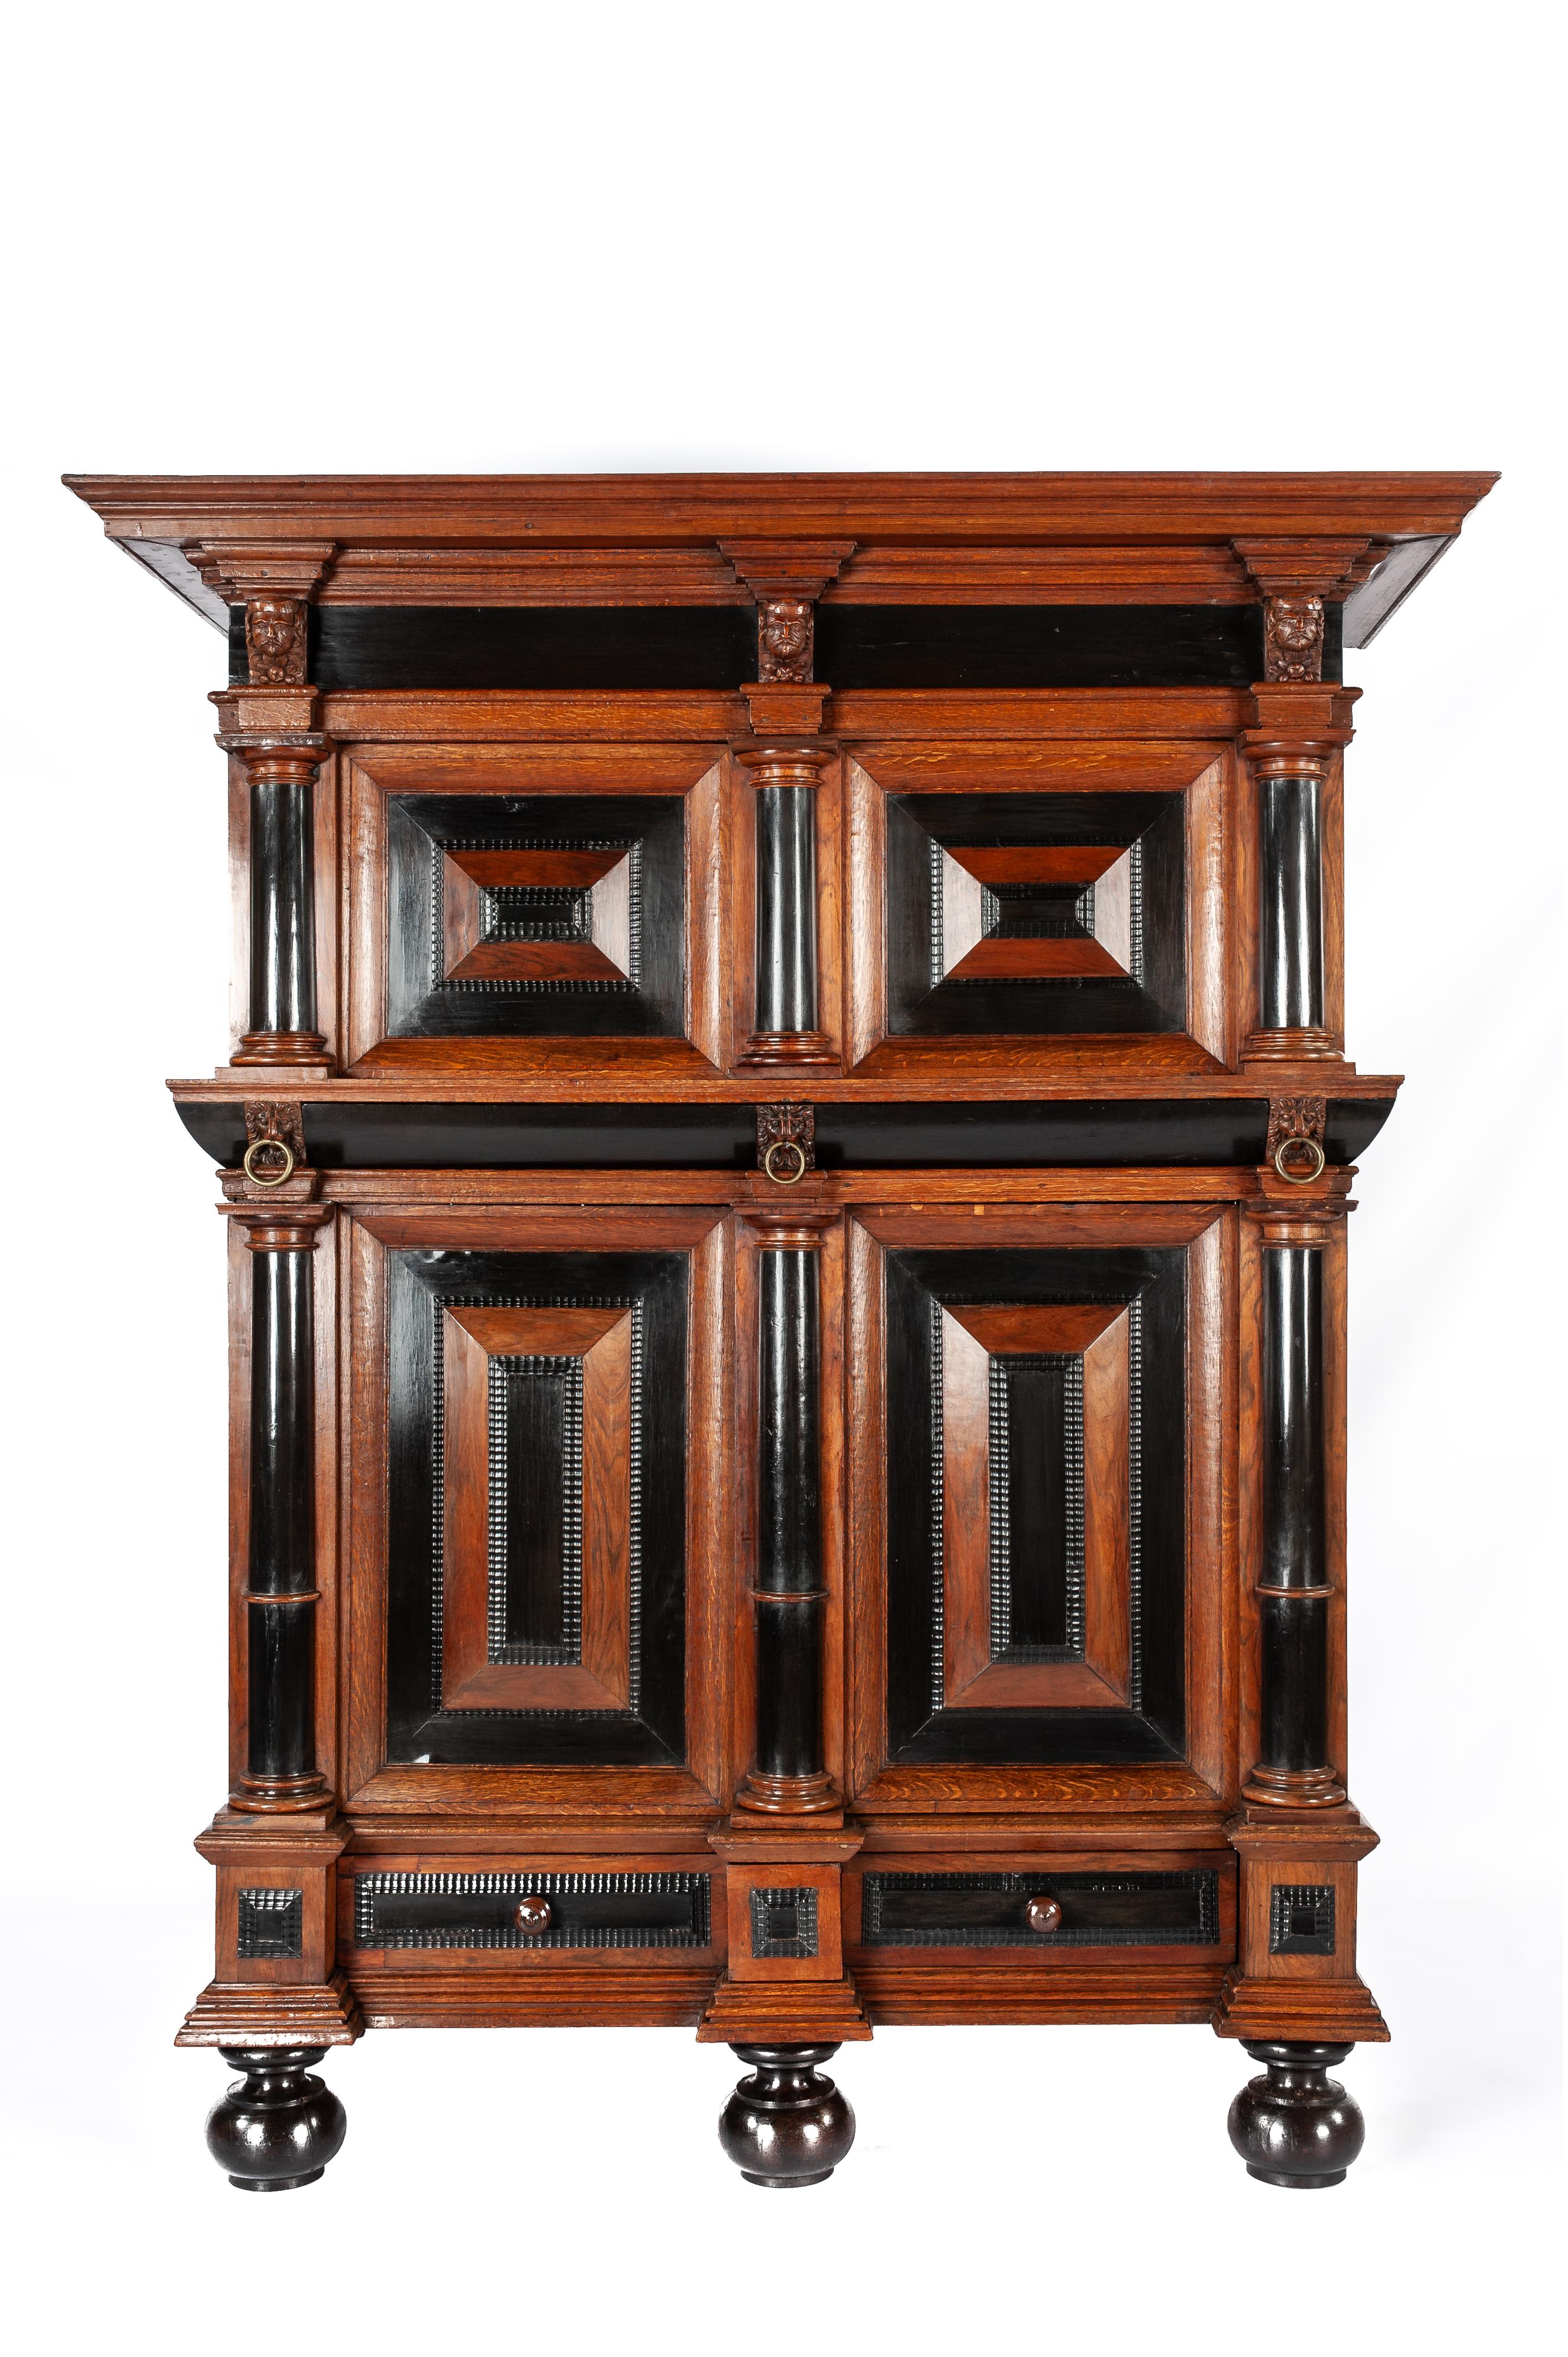 On offer here is an antique four-door cupboard, in Dutch, named “Kussenkast”, that was made in the Northern Netherlands in the late 17th century. This cupboard takes its name from the pillow-shaped thickenings on the doors. The doors are flanked by